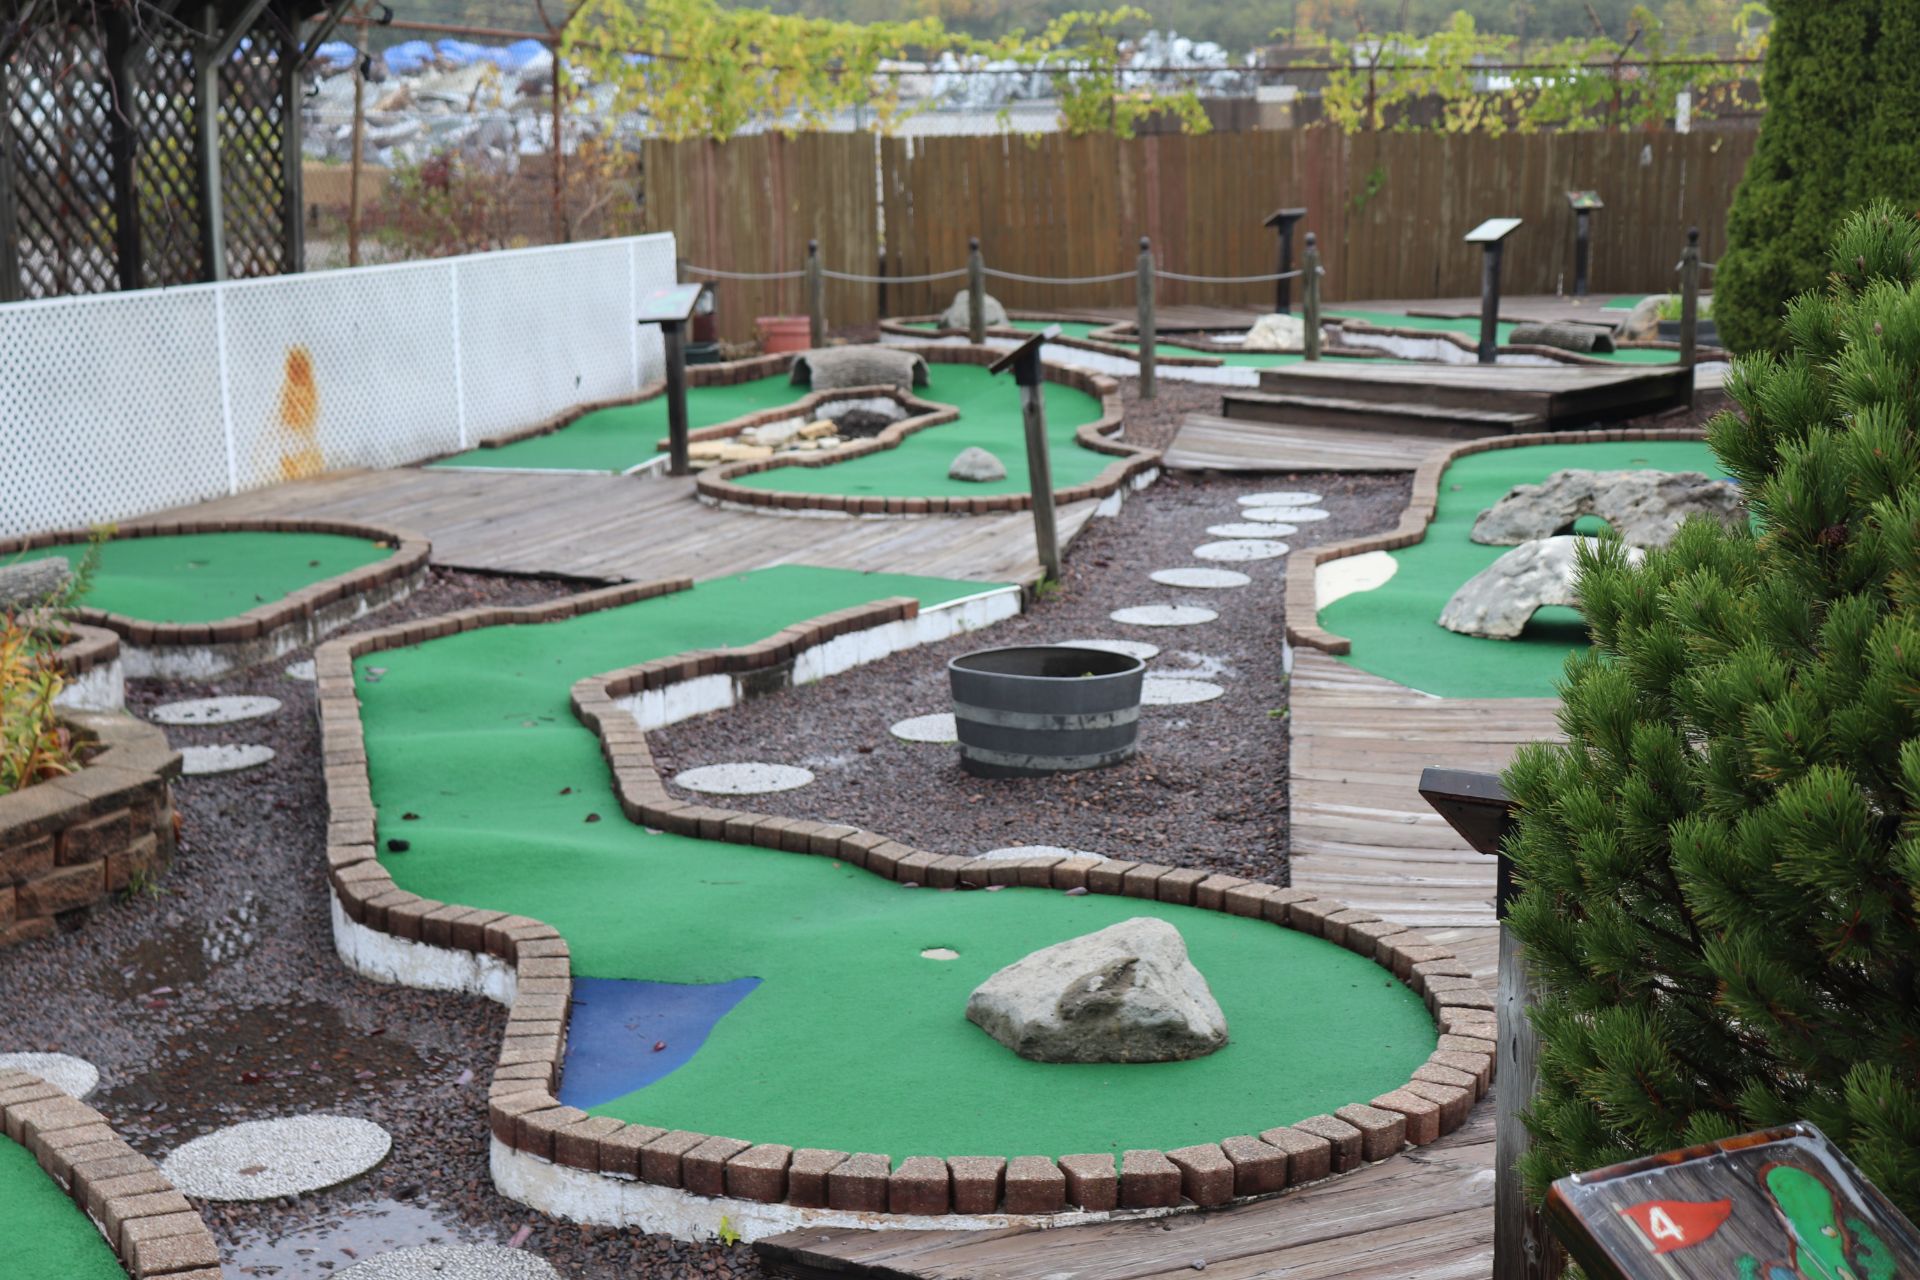 Modular 18-hole mini golf course by Micro Golf Cost of Wisconsin Inc., blueprints provided, carpet p - Image 4 of 9